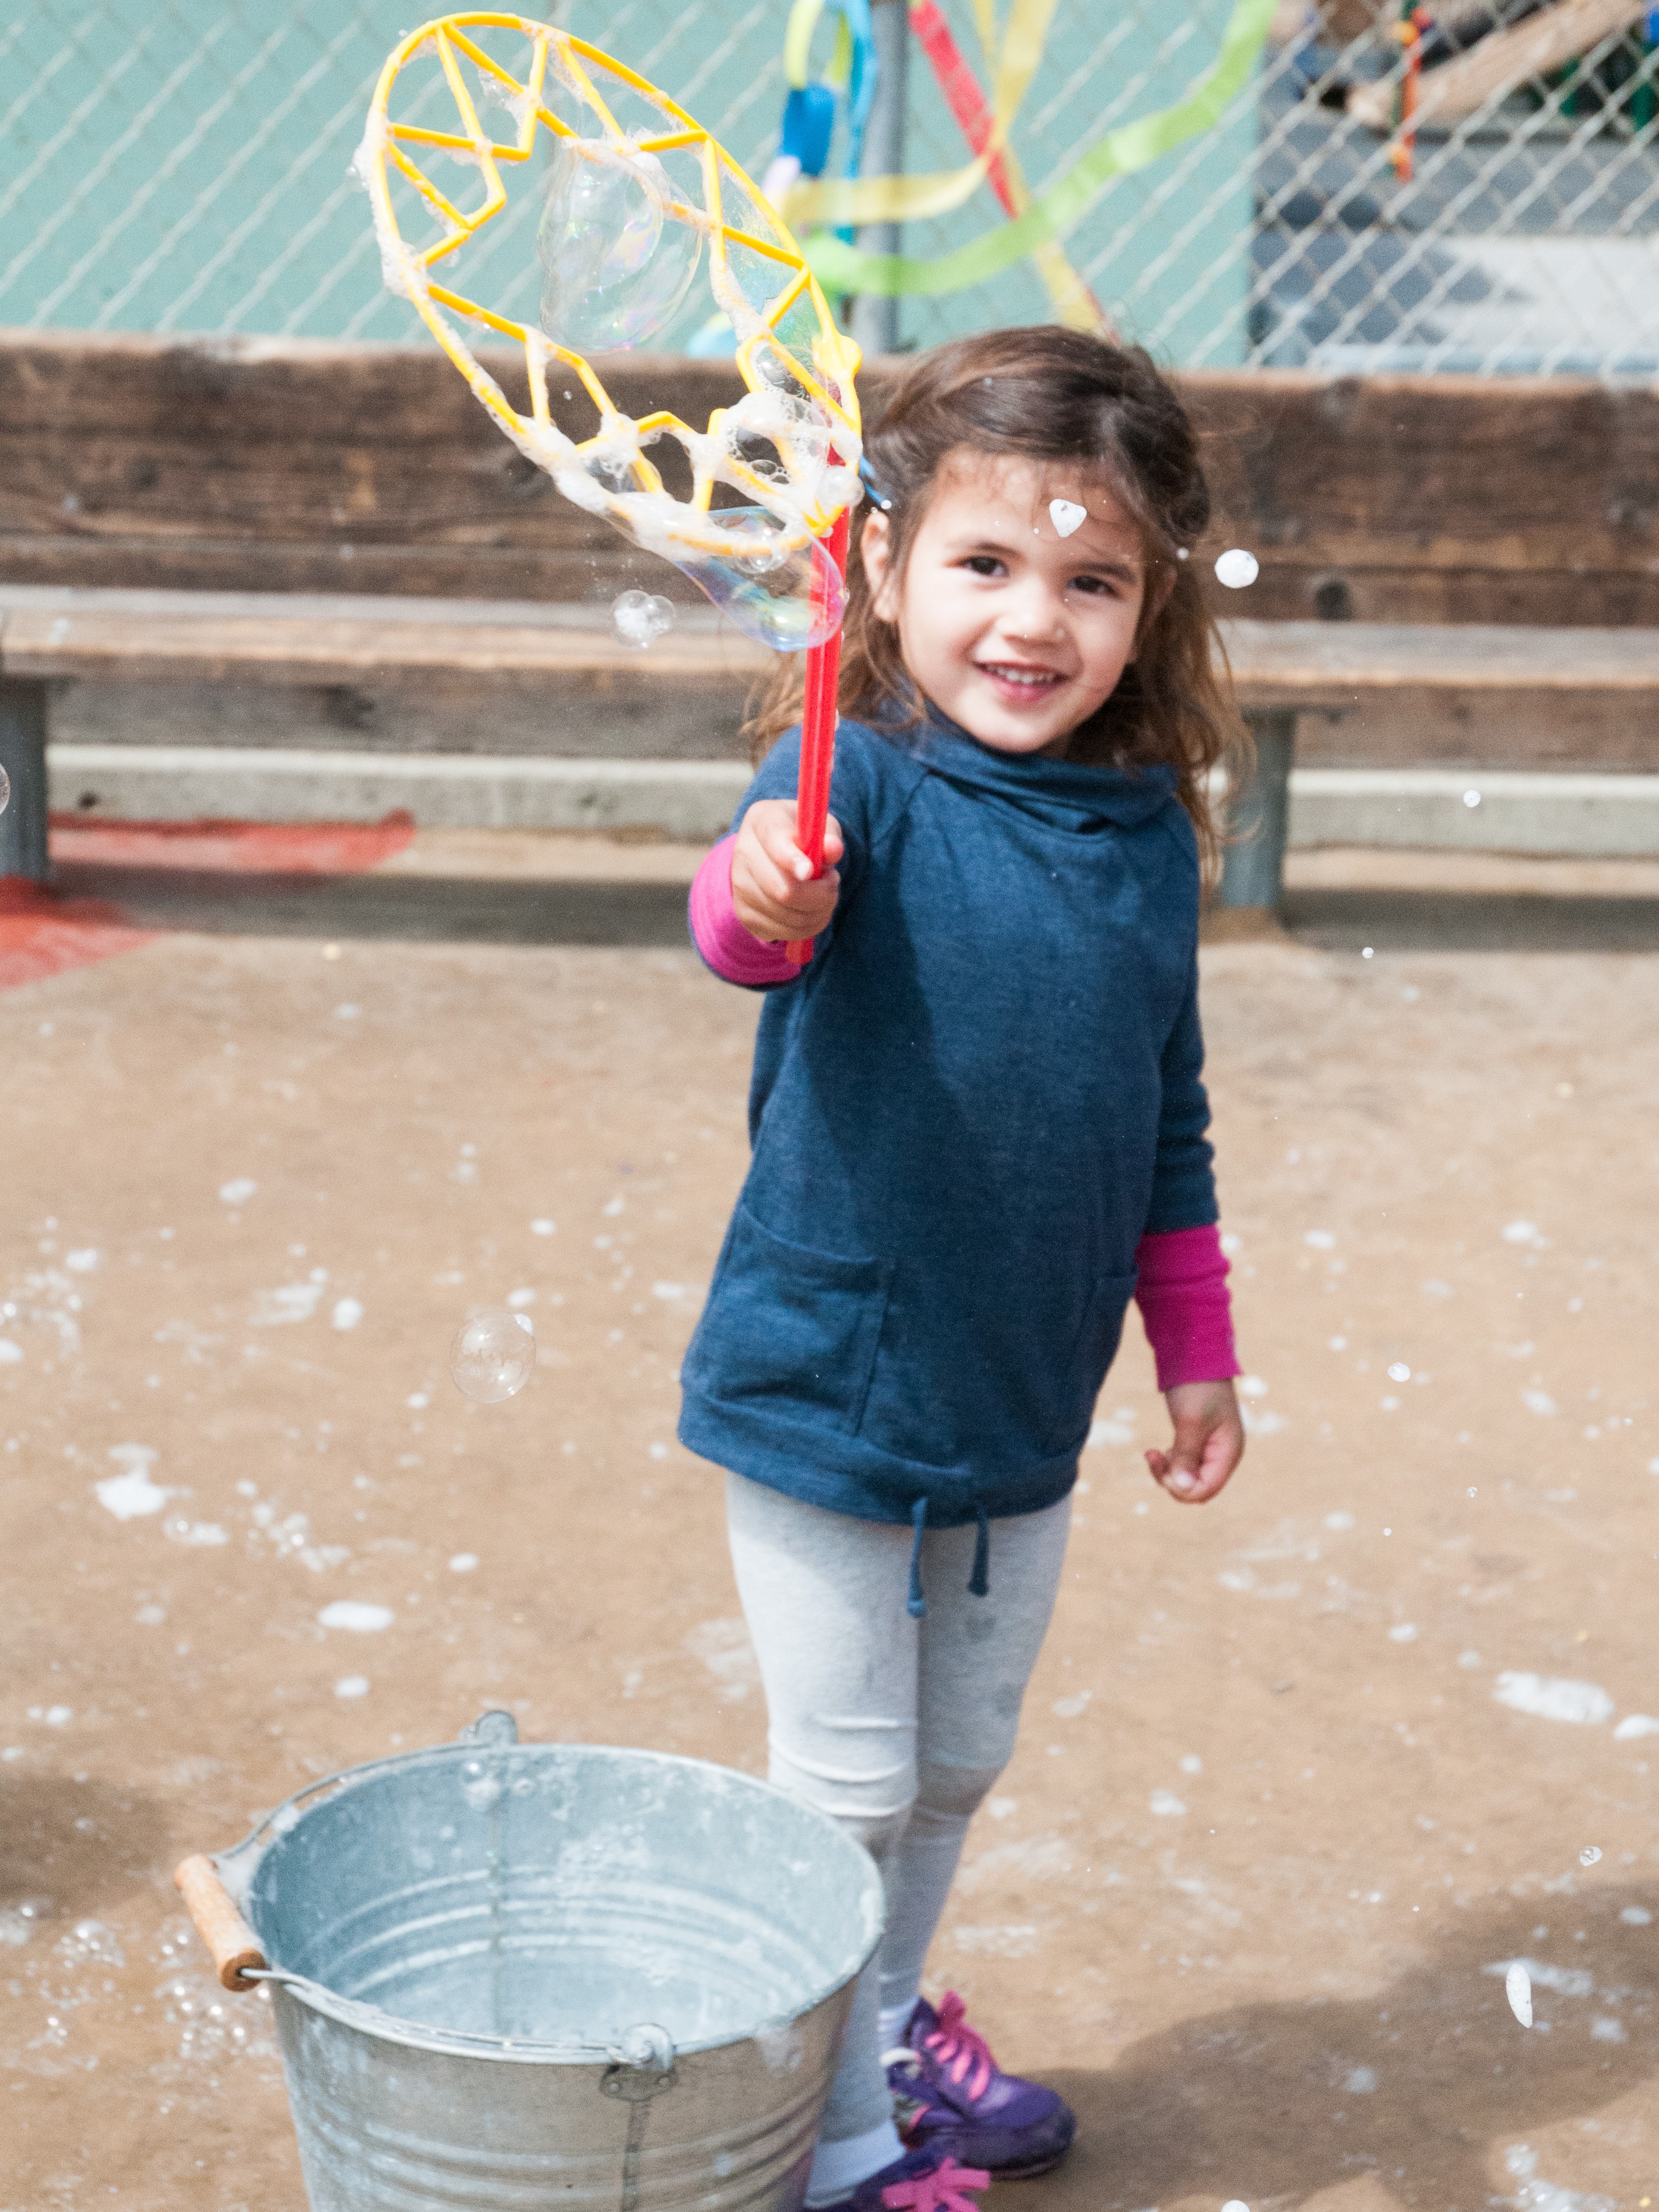 Girl making bubbles at an outdoor school festival